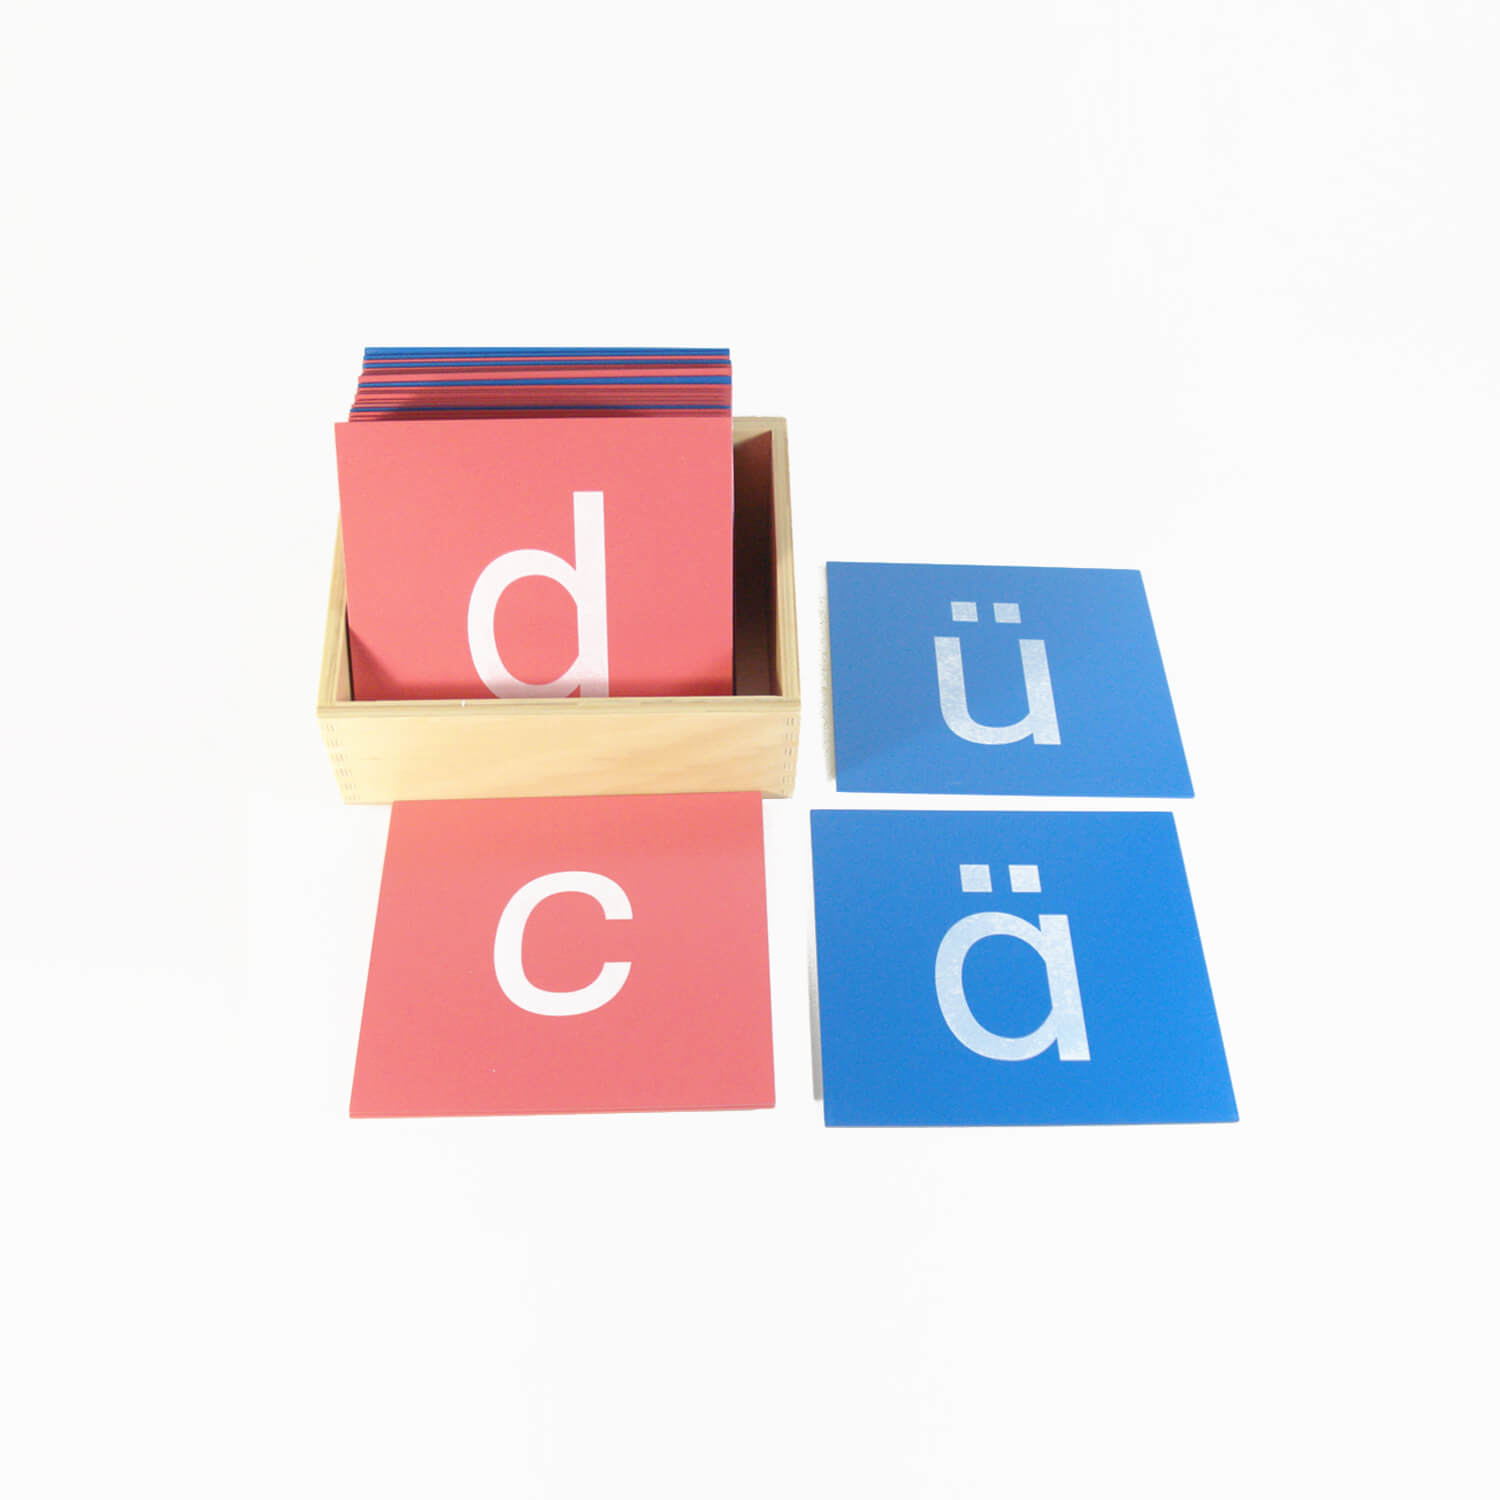 Sandpaper Letters With Box: Lower Case Print (German Version)